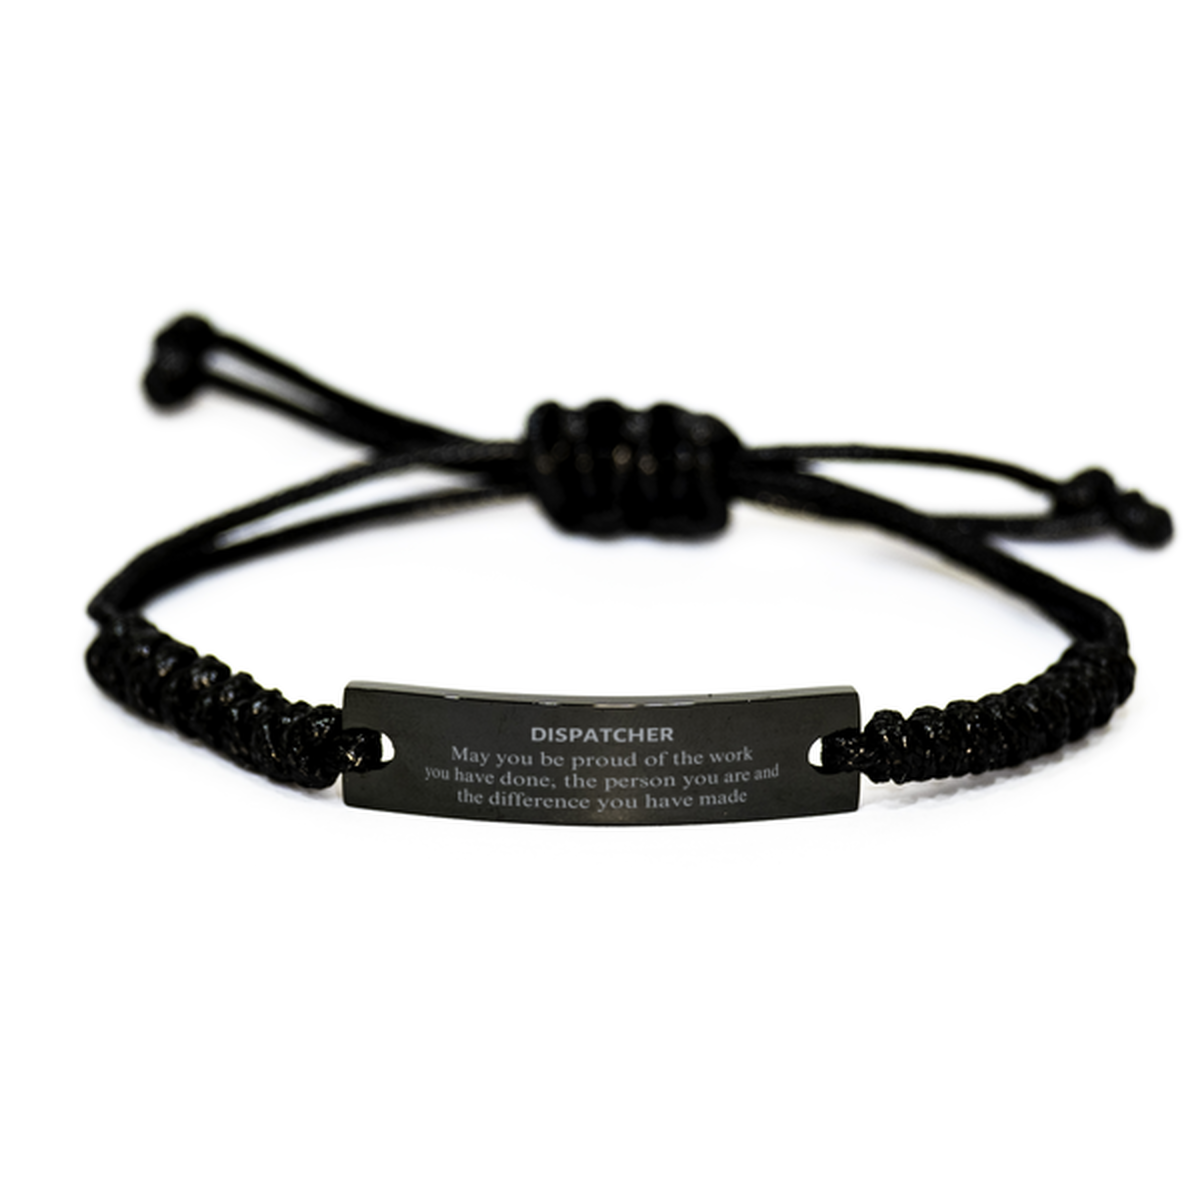 Dispatcher May you be proud of the work you have done, Retirement Dispatcher Black Rope Bracelet for Colleague Appreciation Gifts Amazing for Dispatcher